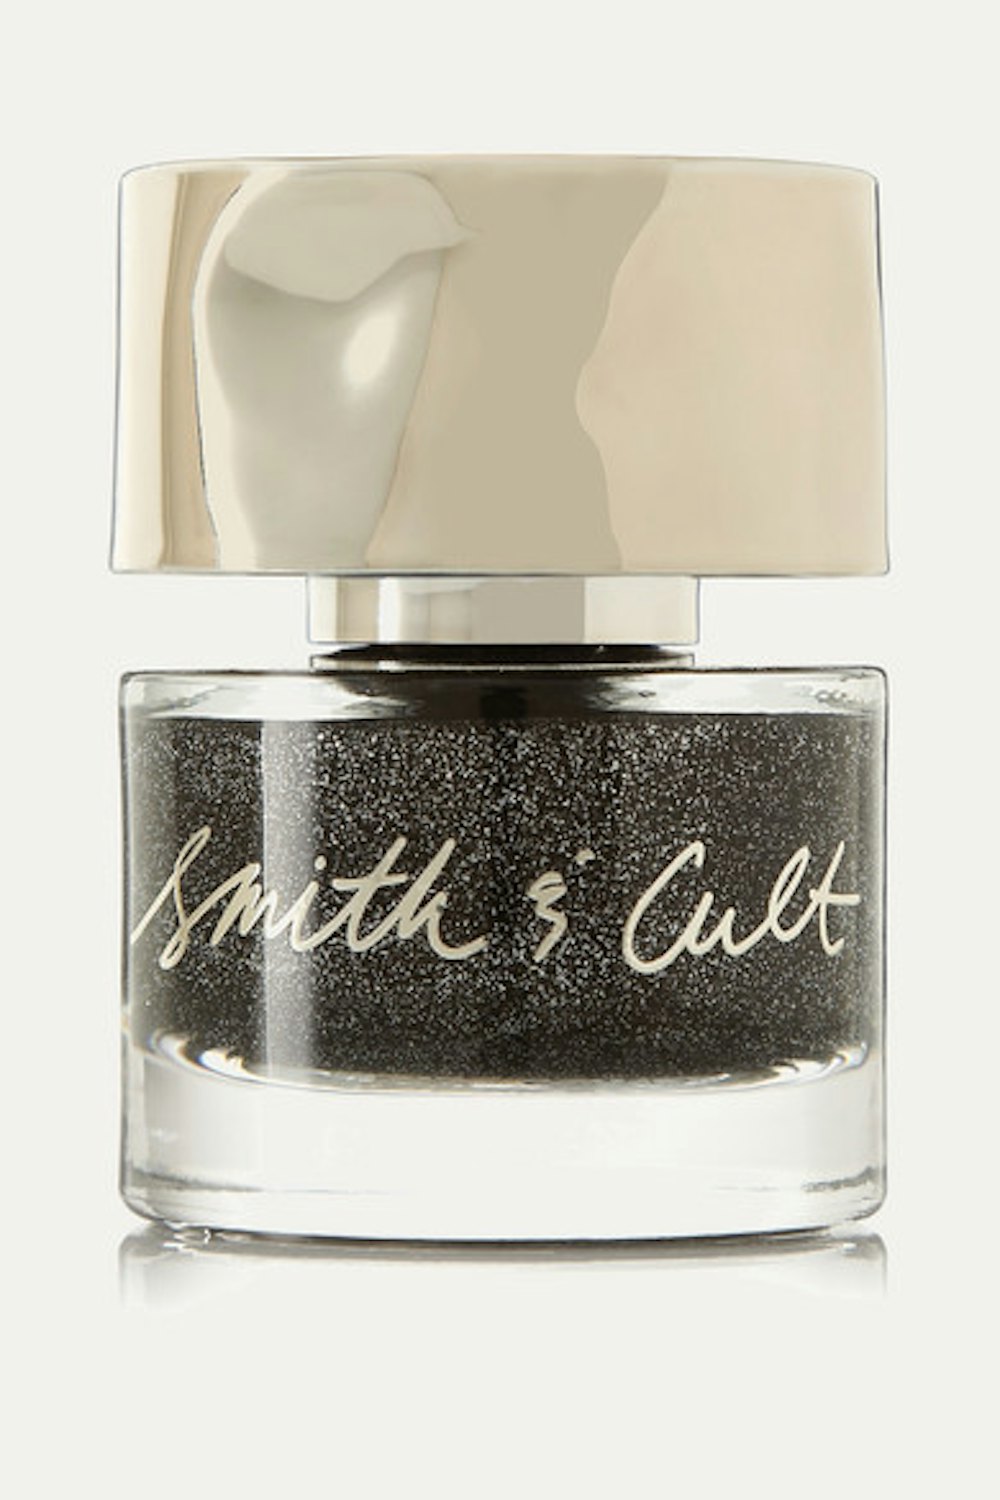 Smith & Cult Nail Polish in Dirty Baby